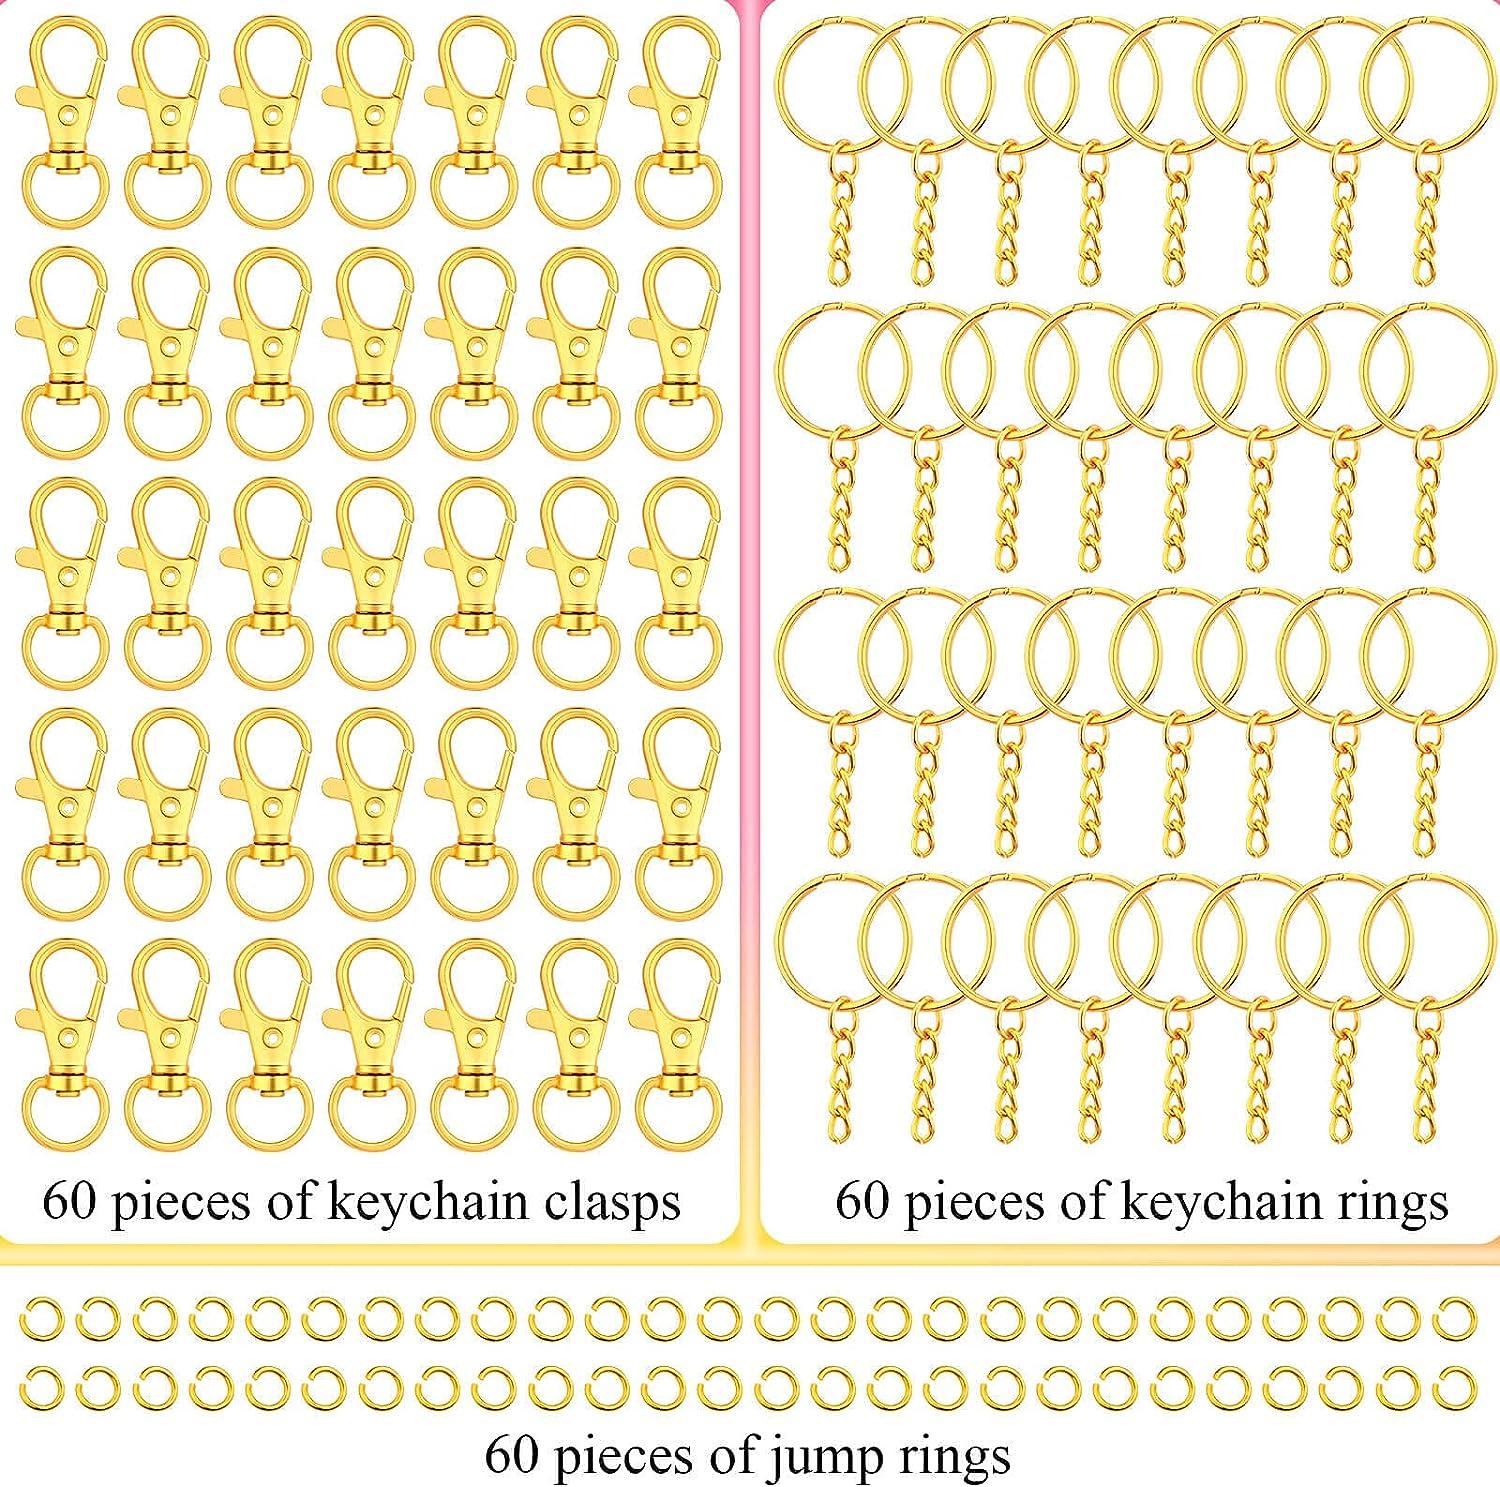 Gold Keychain Rings for Craft Paxcoo 100pcs Keychain Hardware Kit Includes  50Pcs Key Chain Hooks and 50pcs Key Rings Bulk Keychain Making Supplies for  Resin Craft Acrylic Blanks